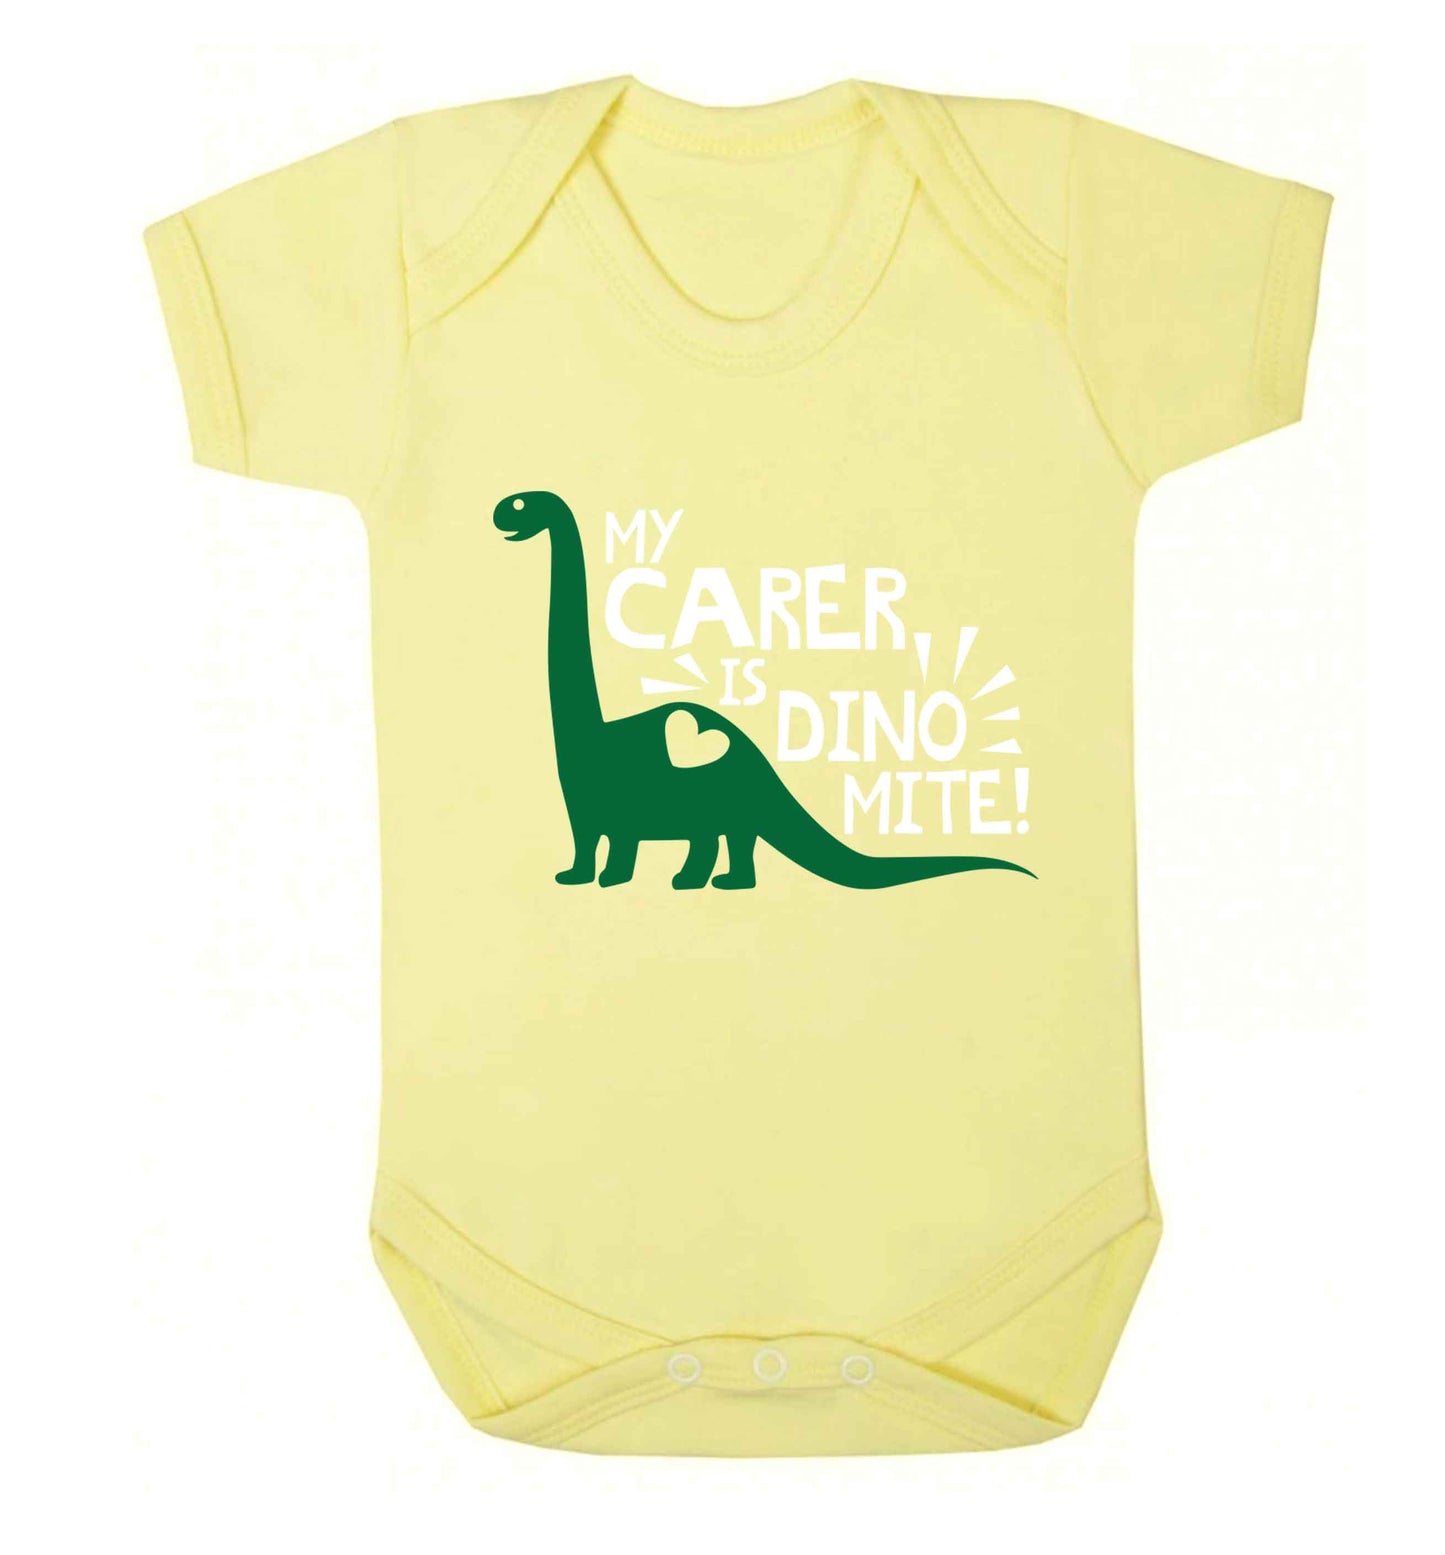 My carer is dinomite! Baby Vest pale yellow 18-24 months